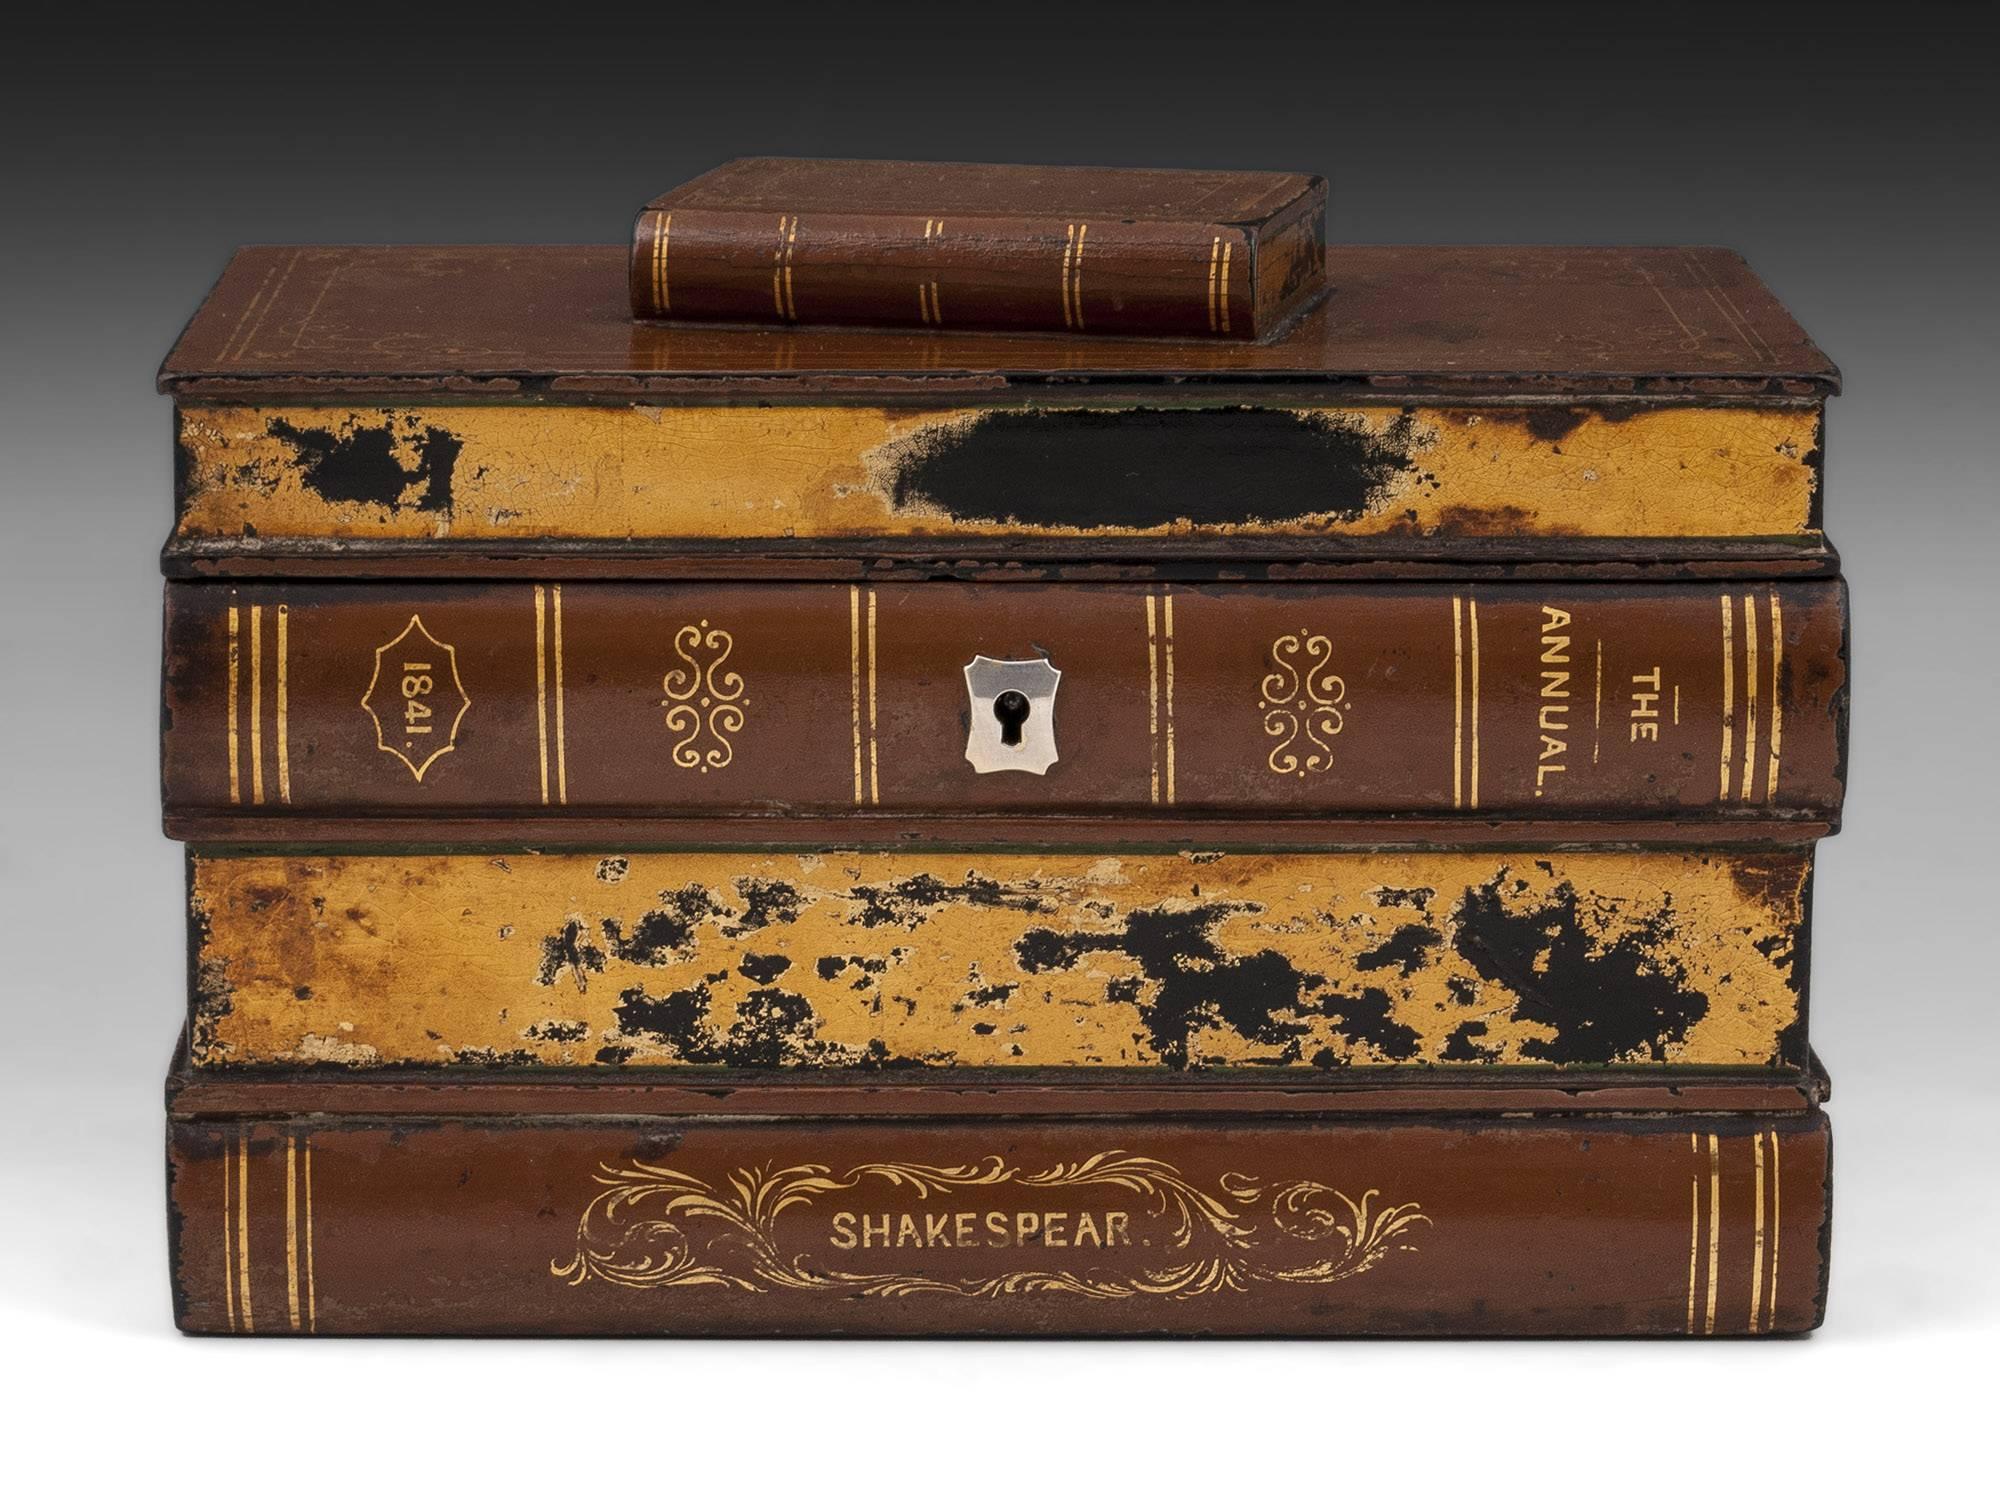 Shakespeare themed papier mache tea caddy in the form of a stack of books with ornate silvered escutcheon. This charming tea caddy is decorated in a brown finish with gold leaf decoration. 

The books spine read; The annual 1841 - Shakespeare -